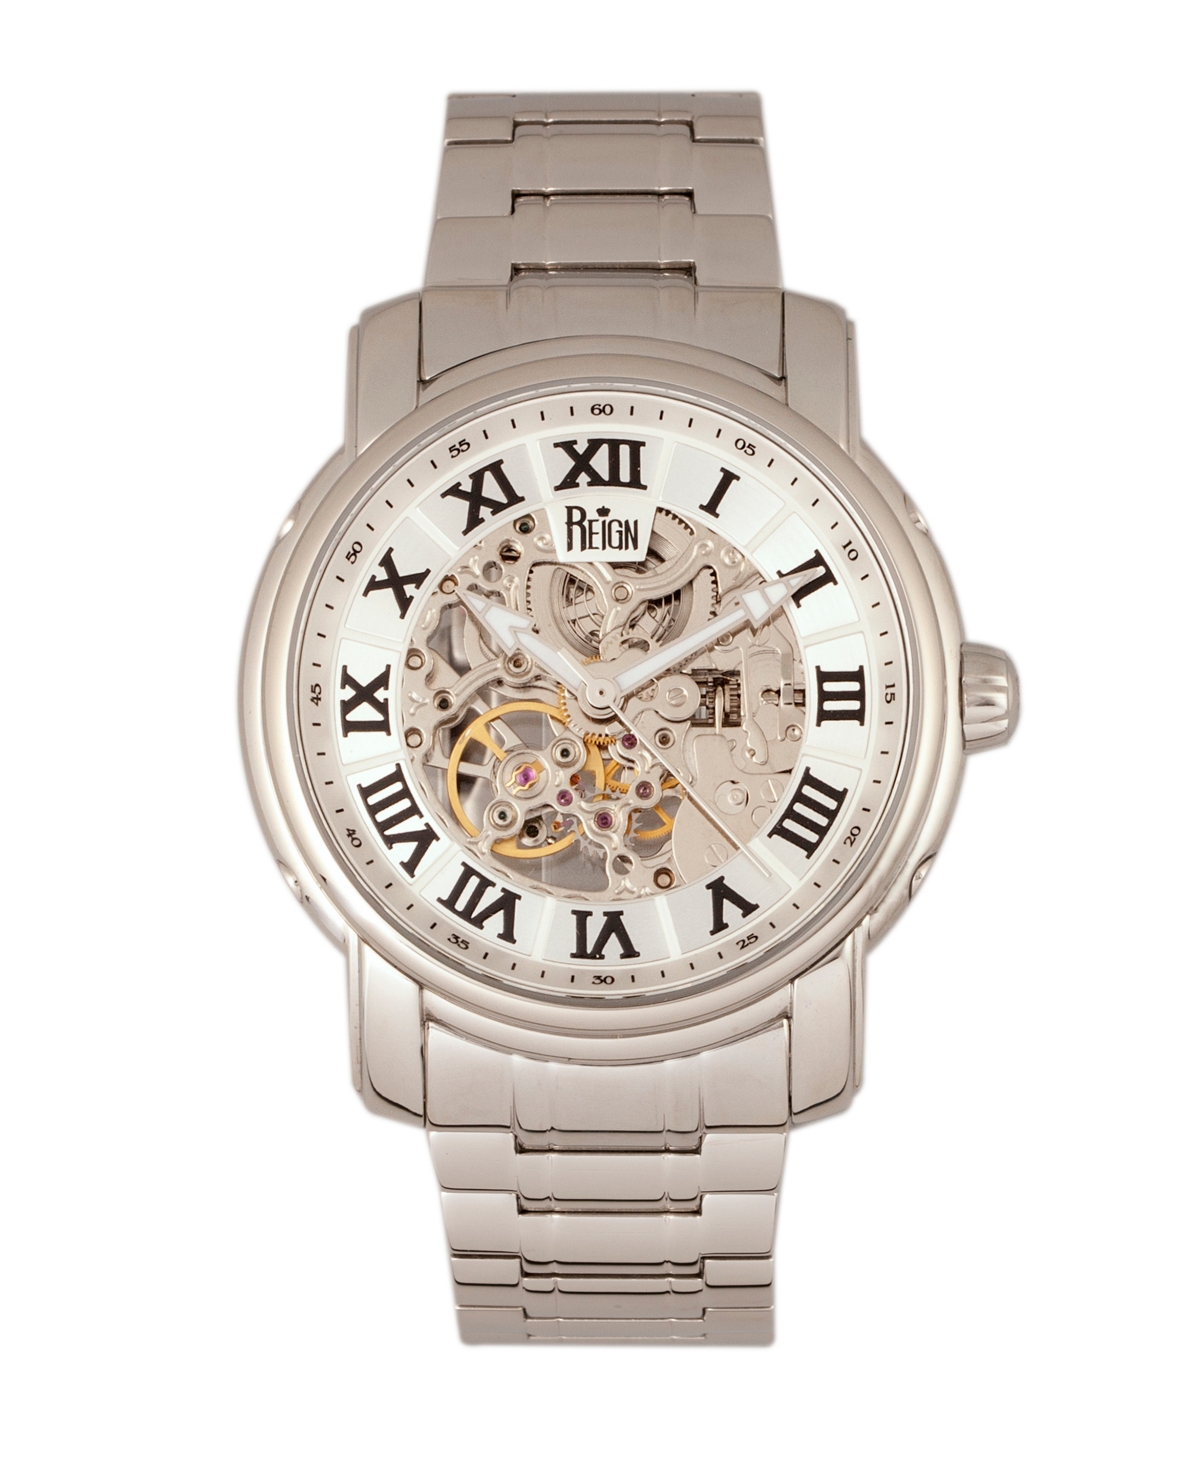 Kahn Automatic White Dial, Skeleton Silver Stainless Steel Watch 45mm - Silver